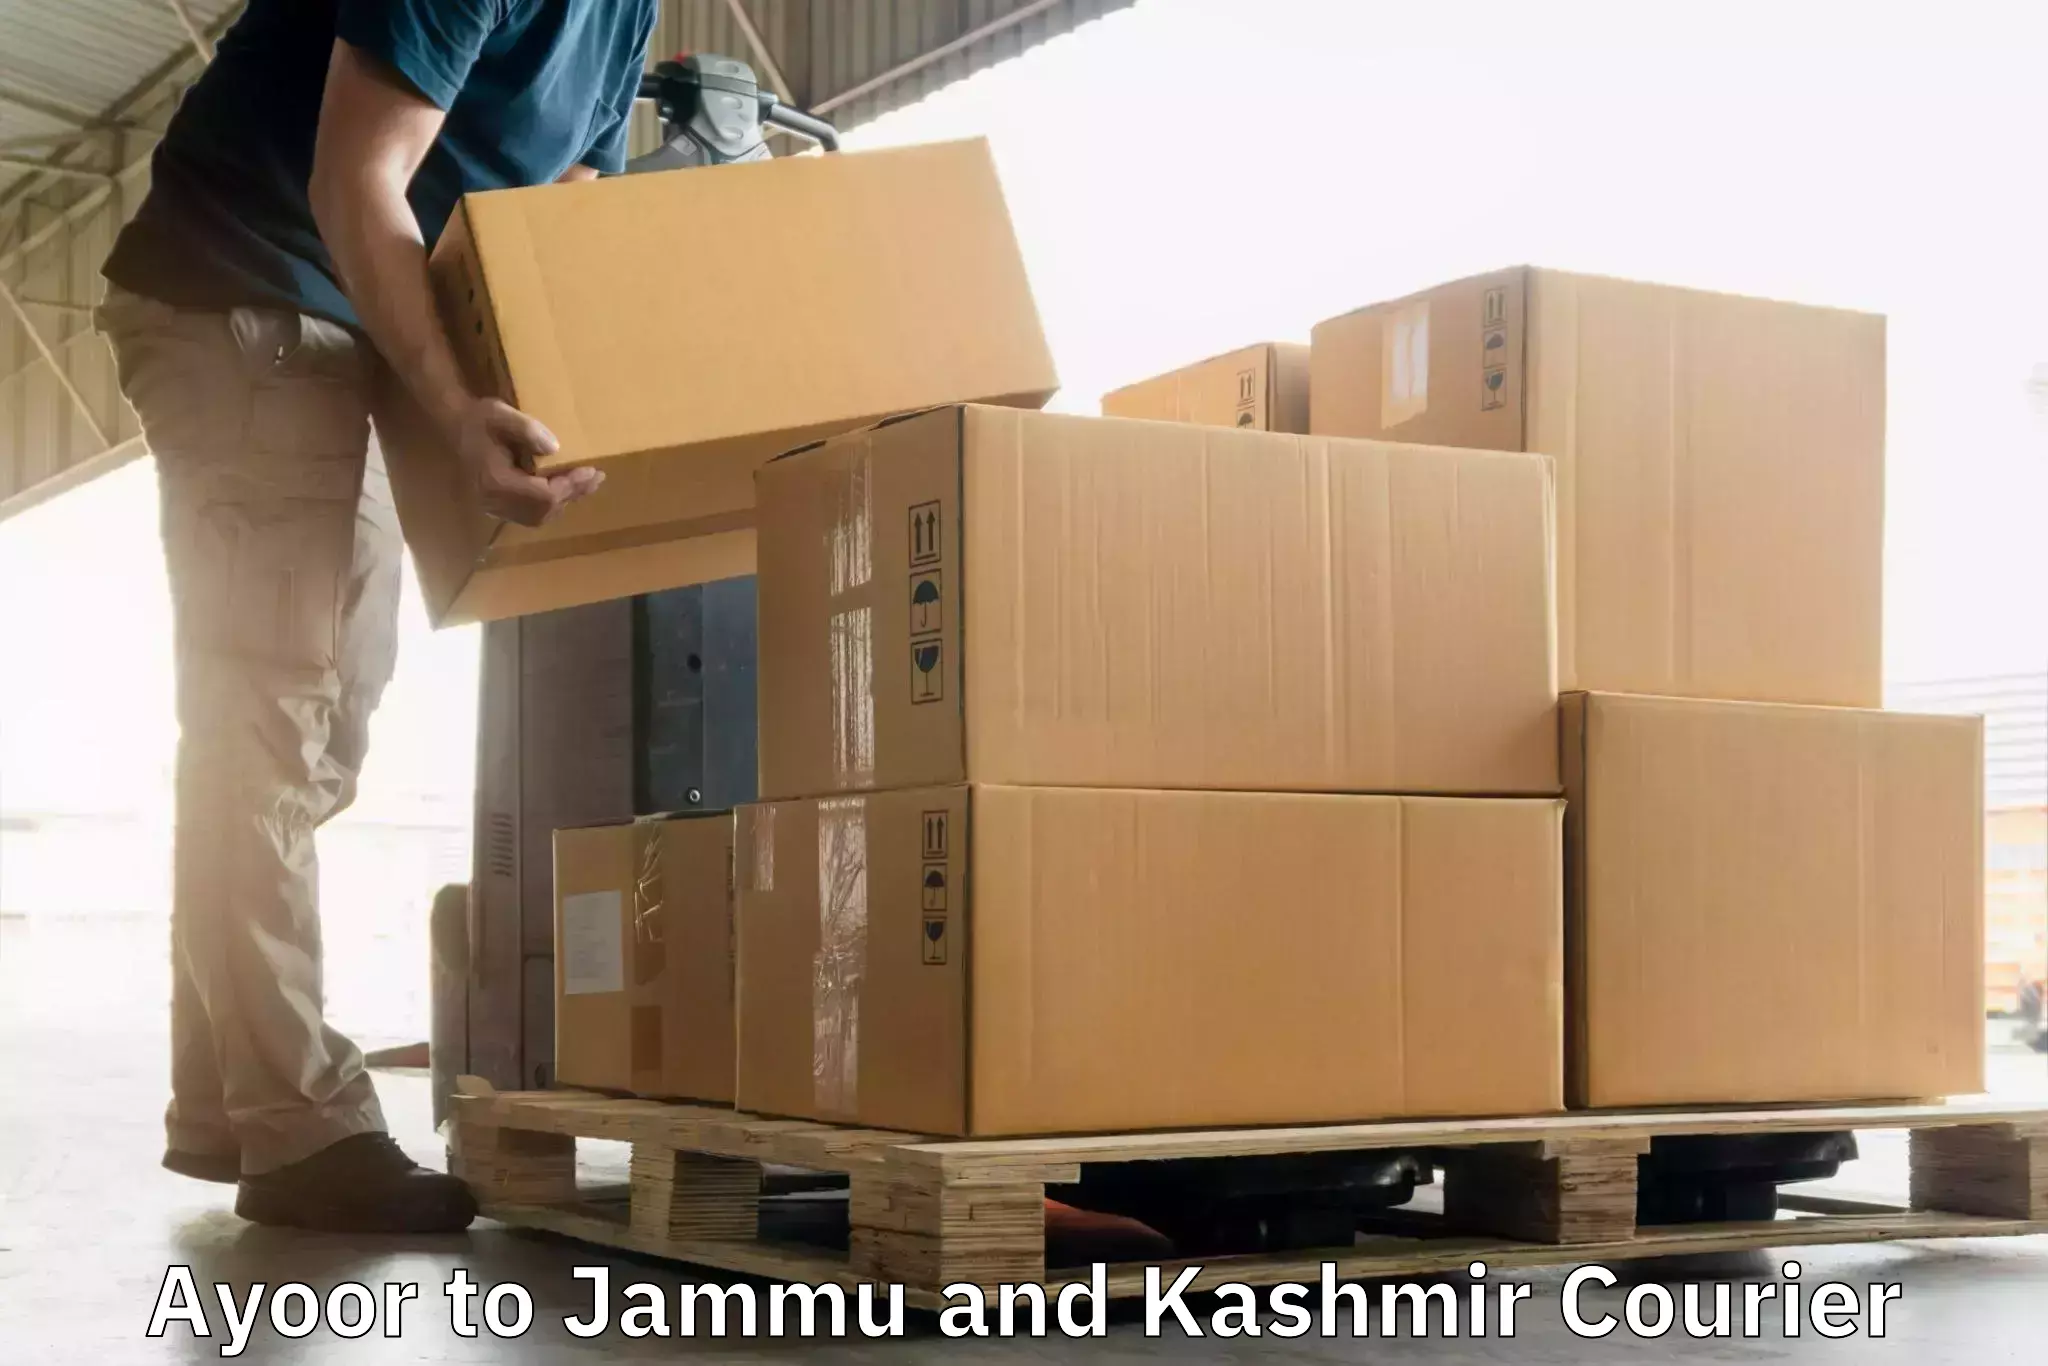 Advanced freight services Ayoor to Jammu and Kashmir